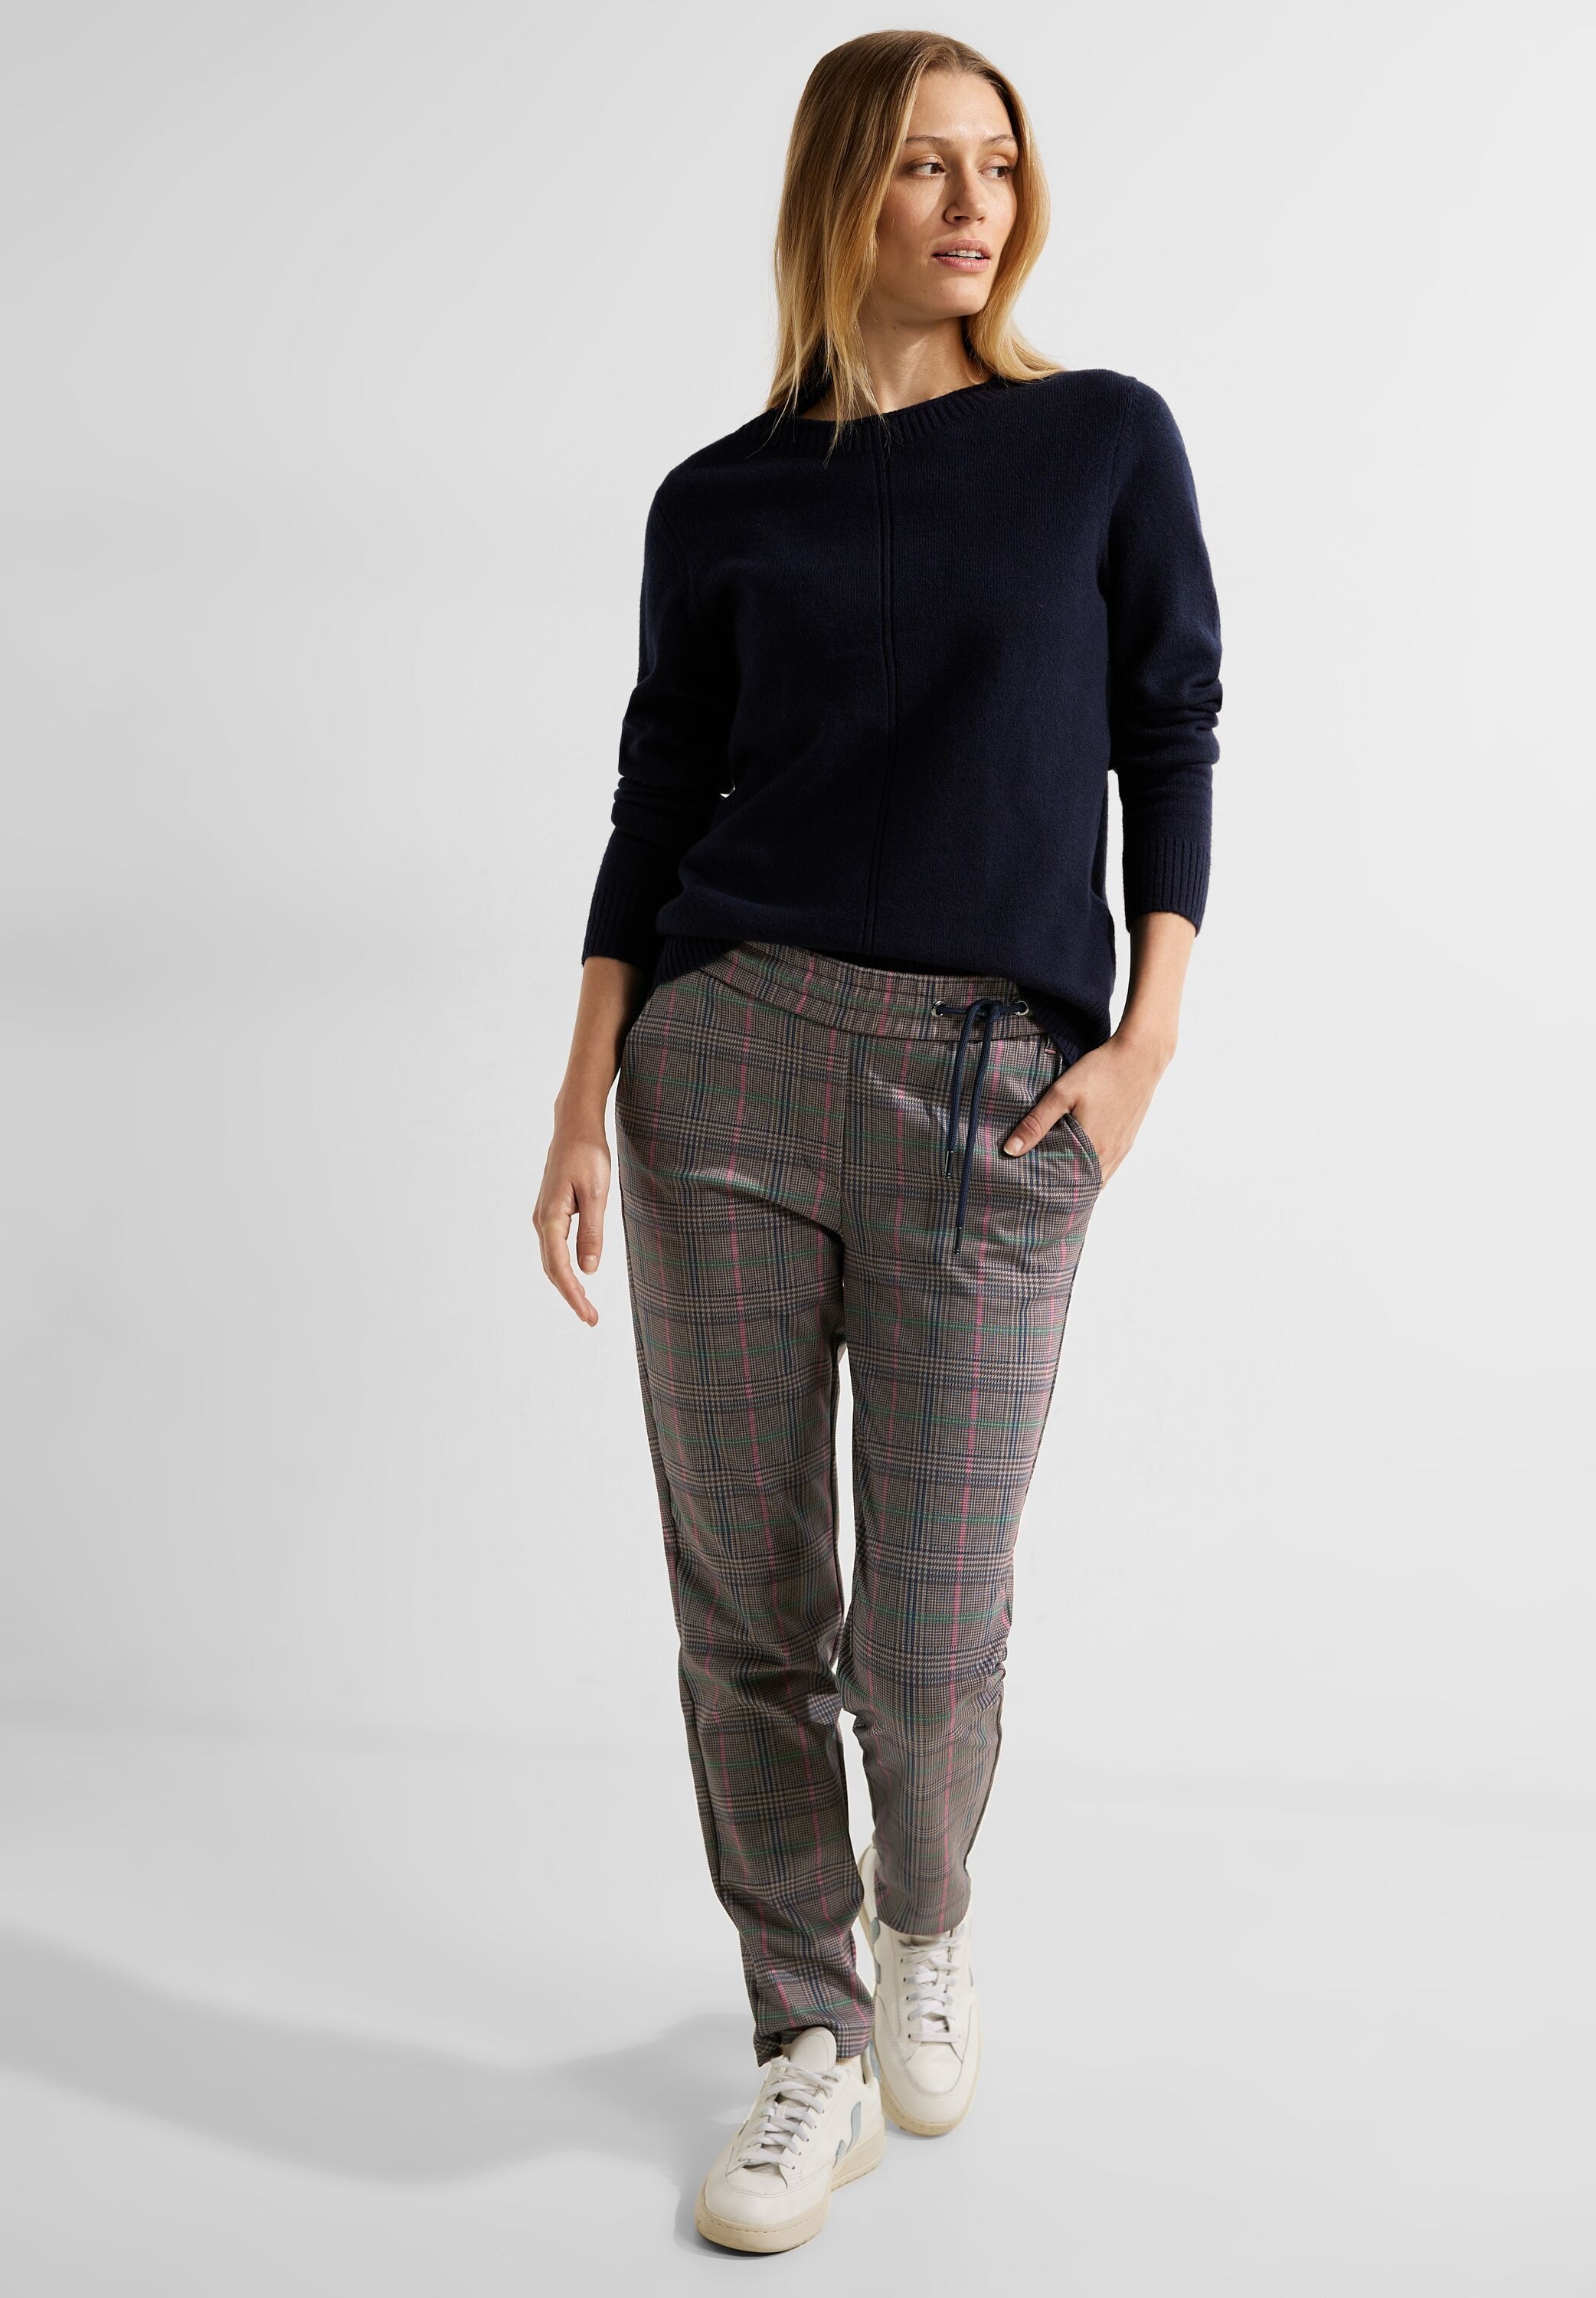 Cecil Jogger Pants »Damenhose Karomuster ♕ bei Check«, Tracey